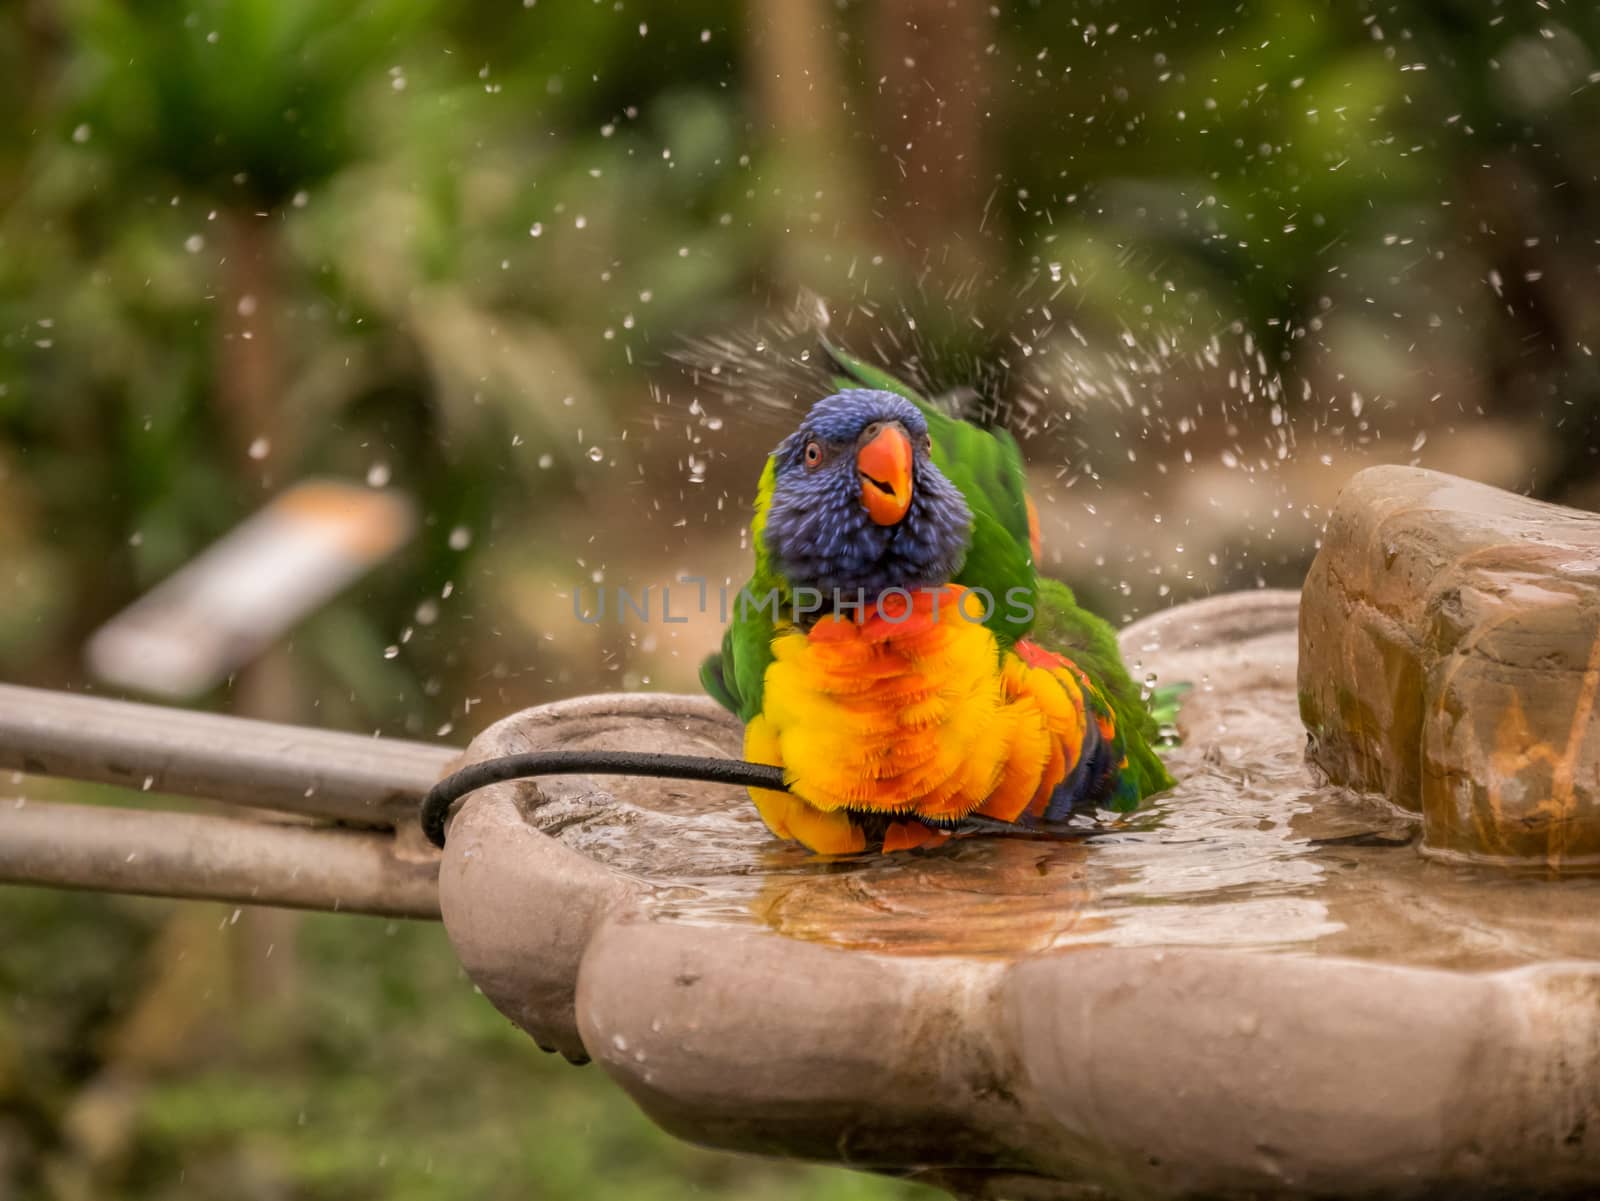 Colorful parrot taking a bath and splashing with water